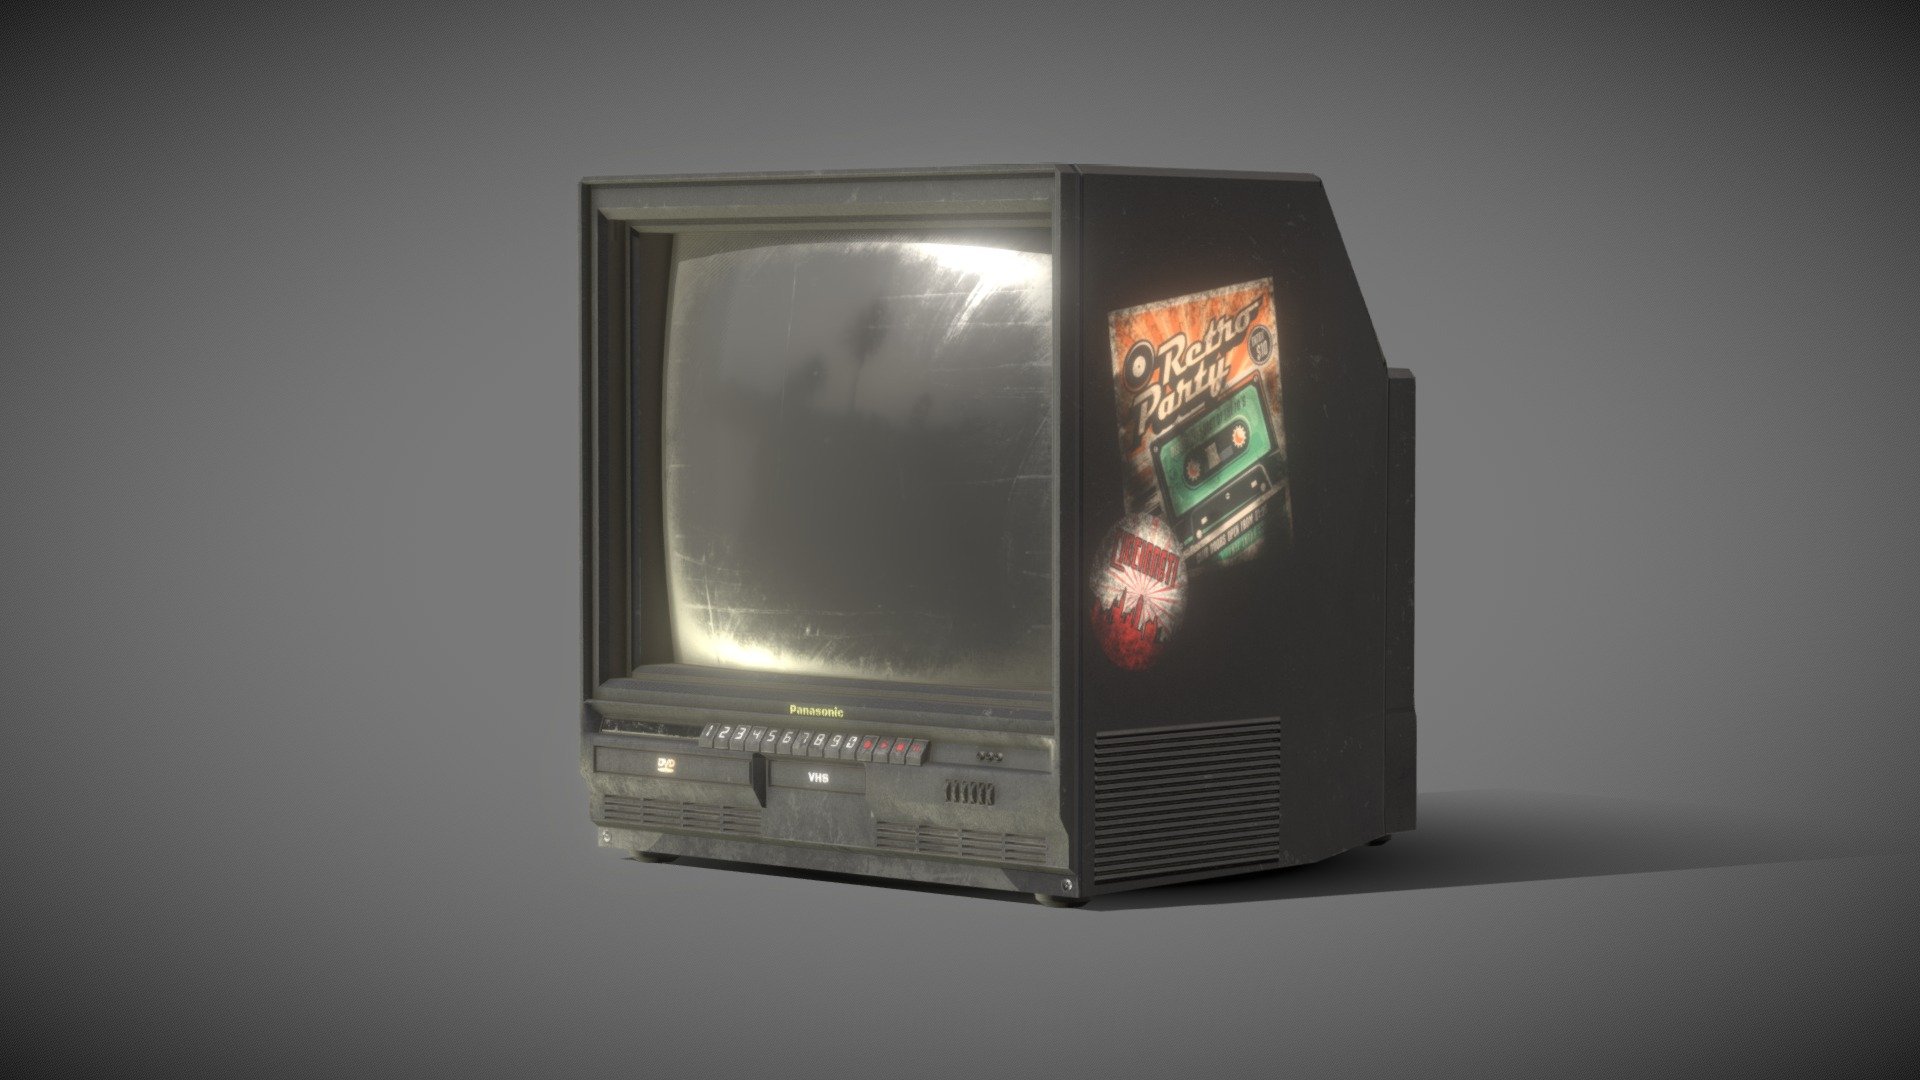 Old Vintage Box Television Free Electronic TV 3D Model - - 3D